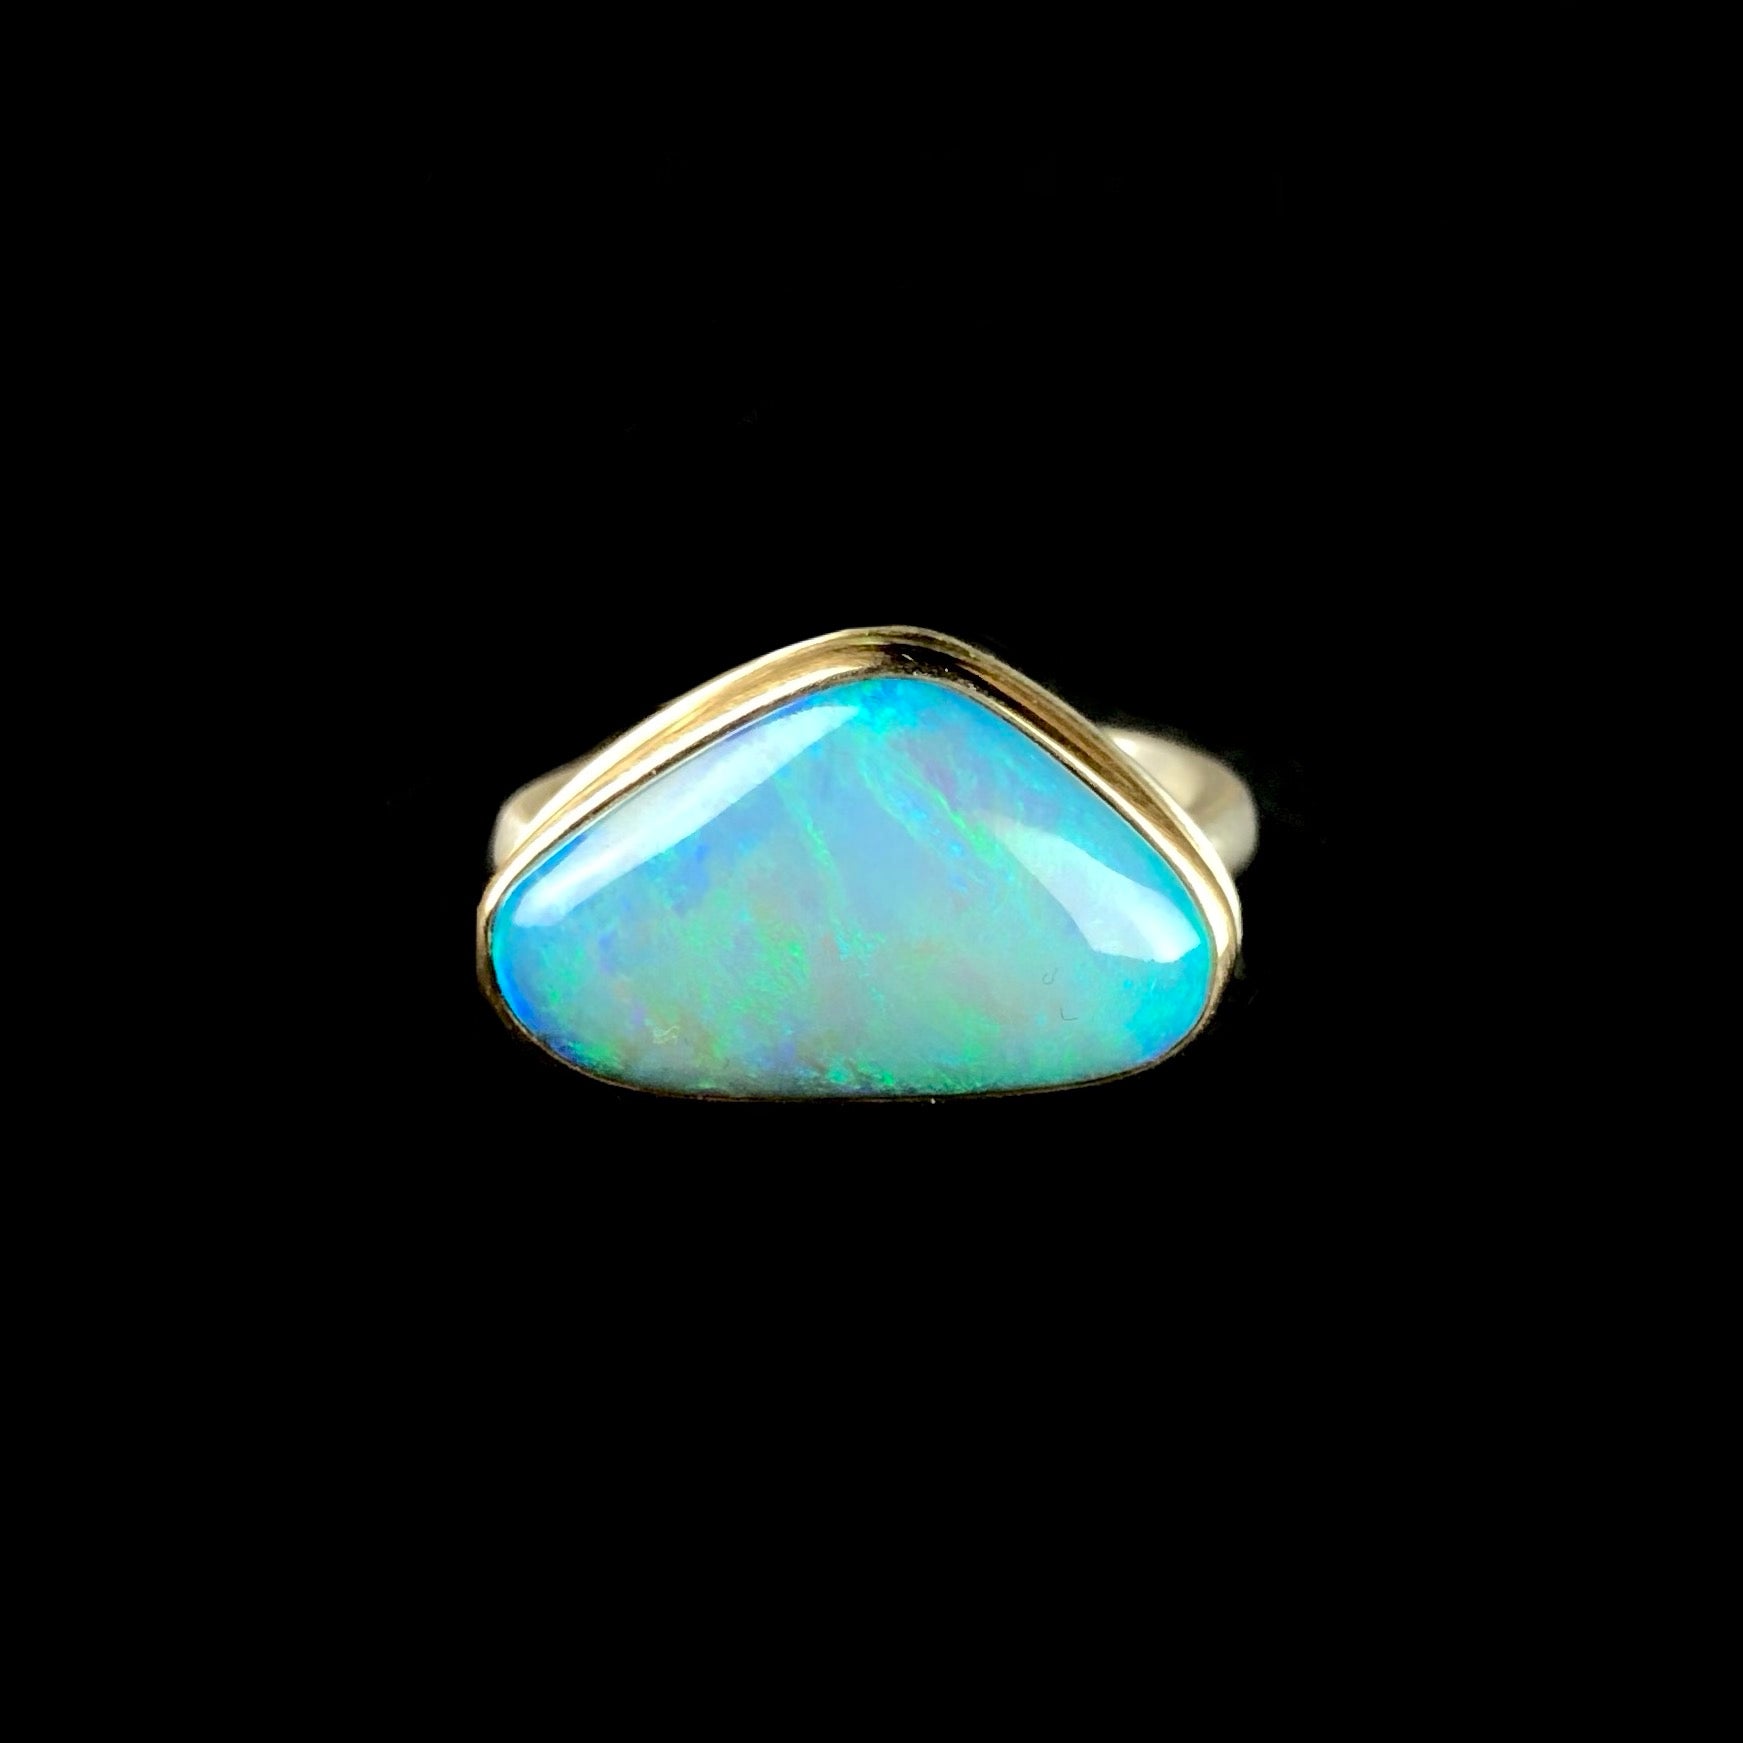 Front view of triangular shaped green and blue opal stone ring